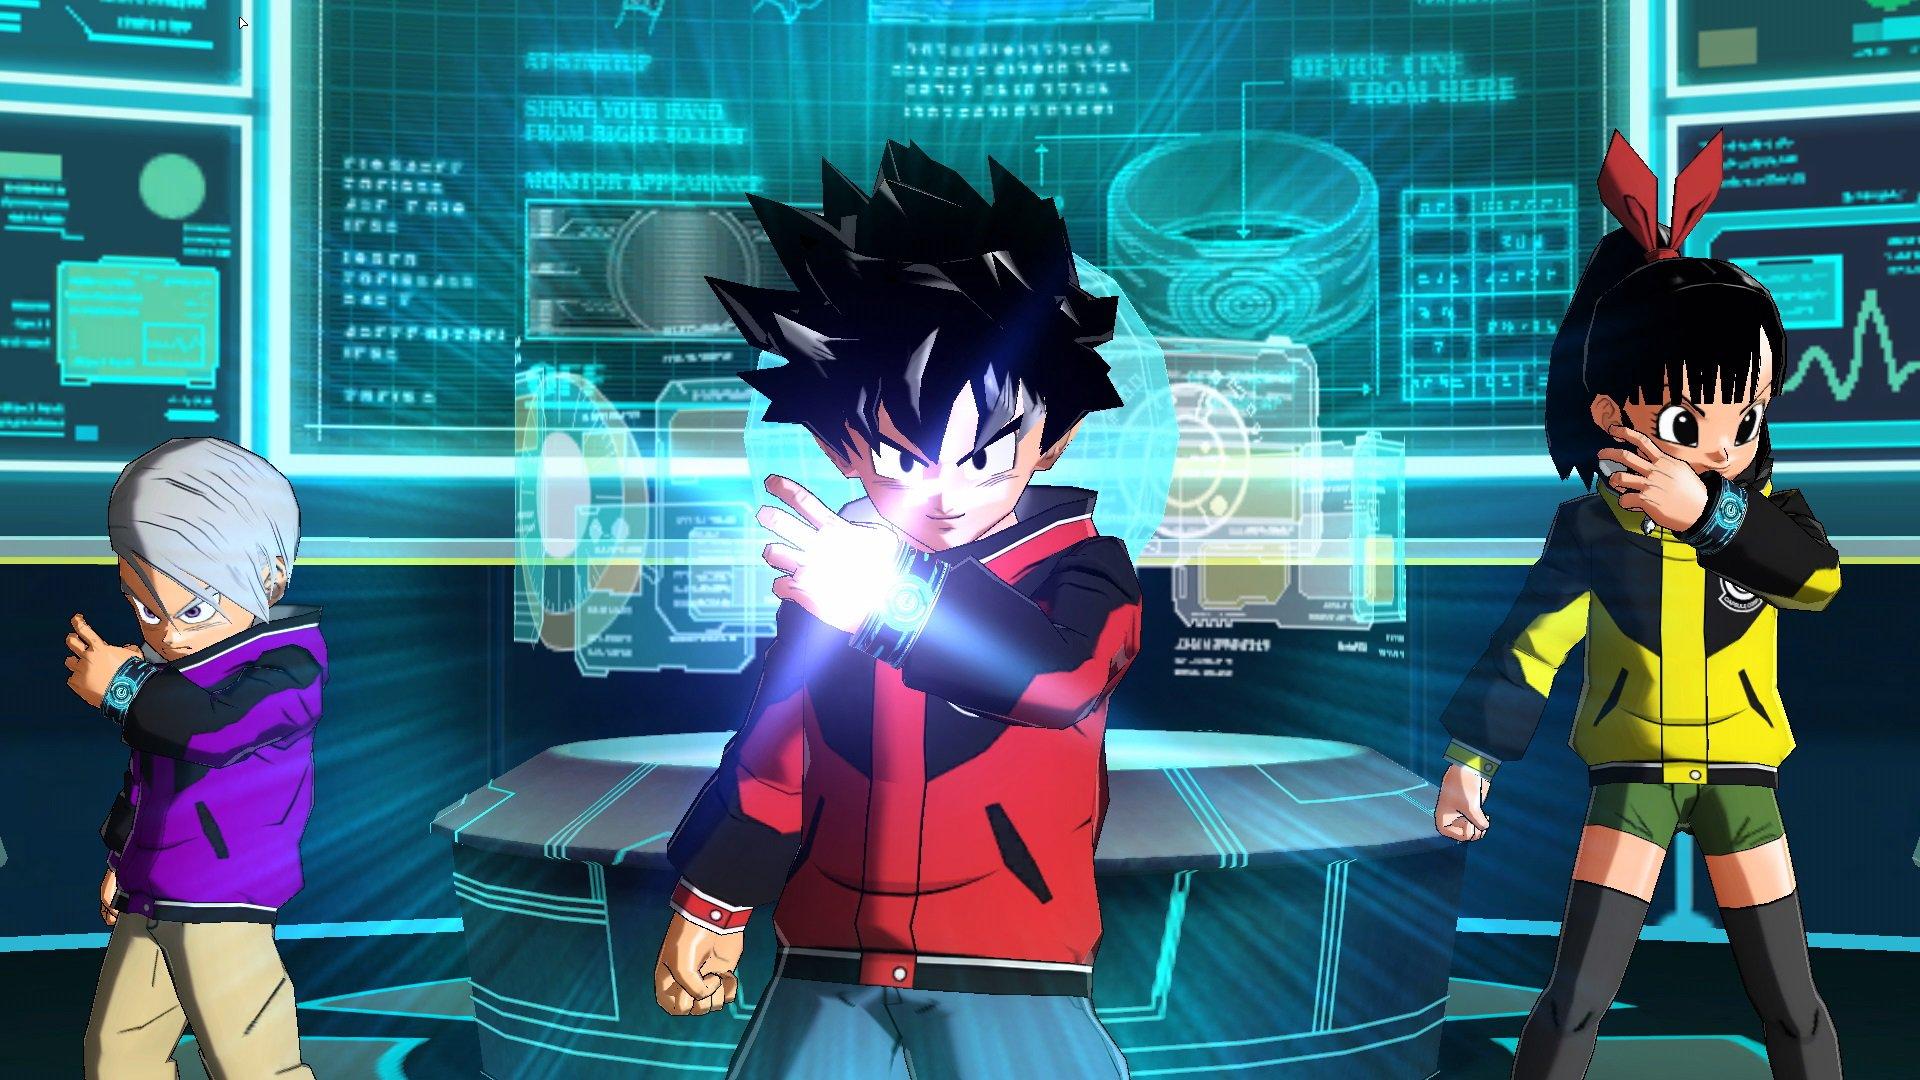 A new Super Dragon Ball Heroes game is coming to PC and Switch this